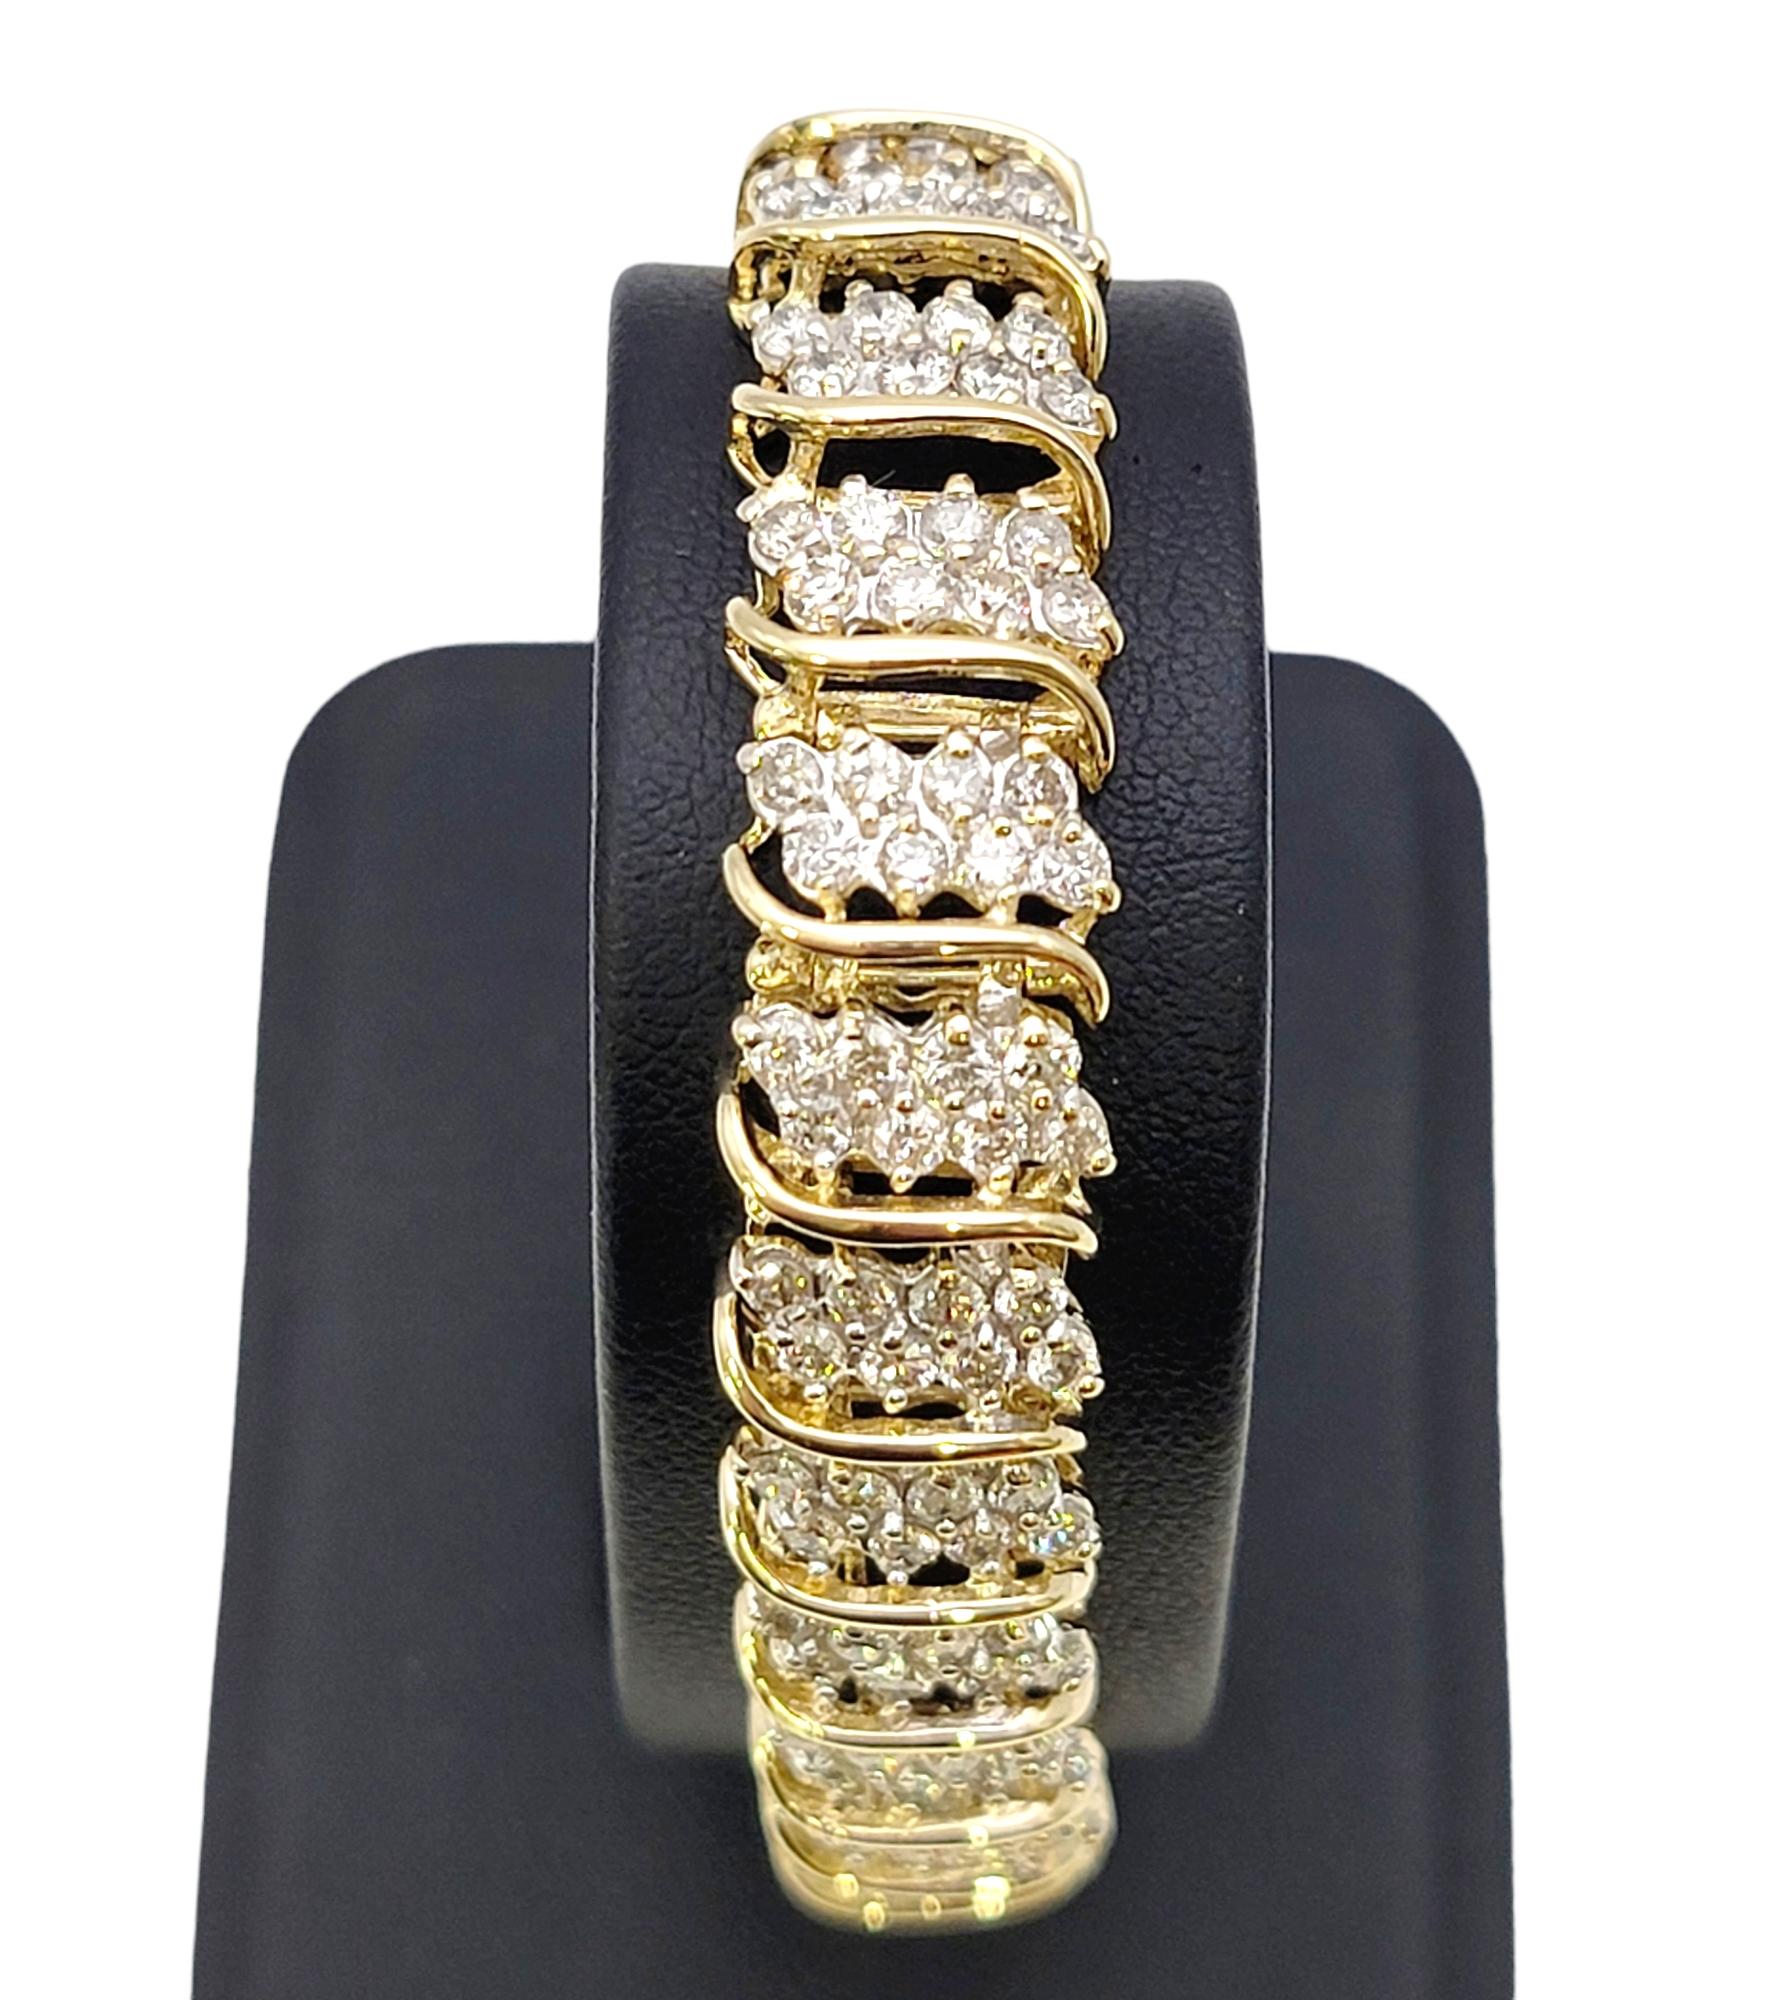 8.81 Carats Total Diamond Cluster 'S' Link Tennis Bracelet in Yellow Gold 5